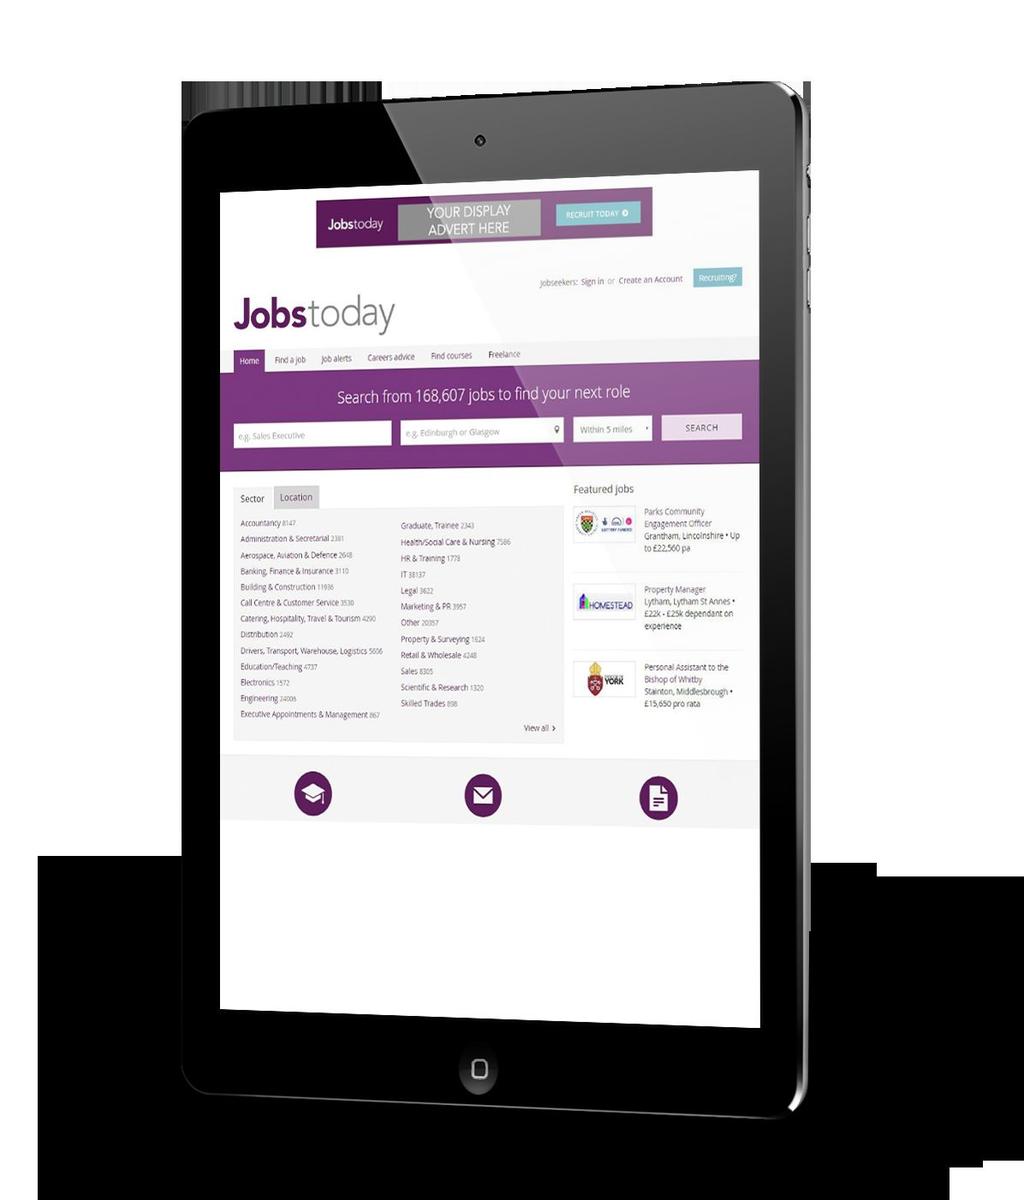 DISPLAY ADVERTS Increase interest in your vacancy with a display banner advert on Jobstoday.co.